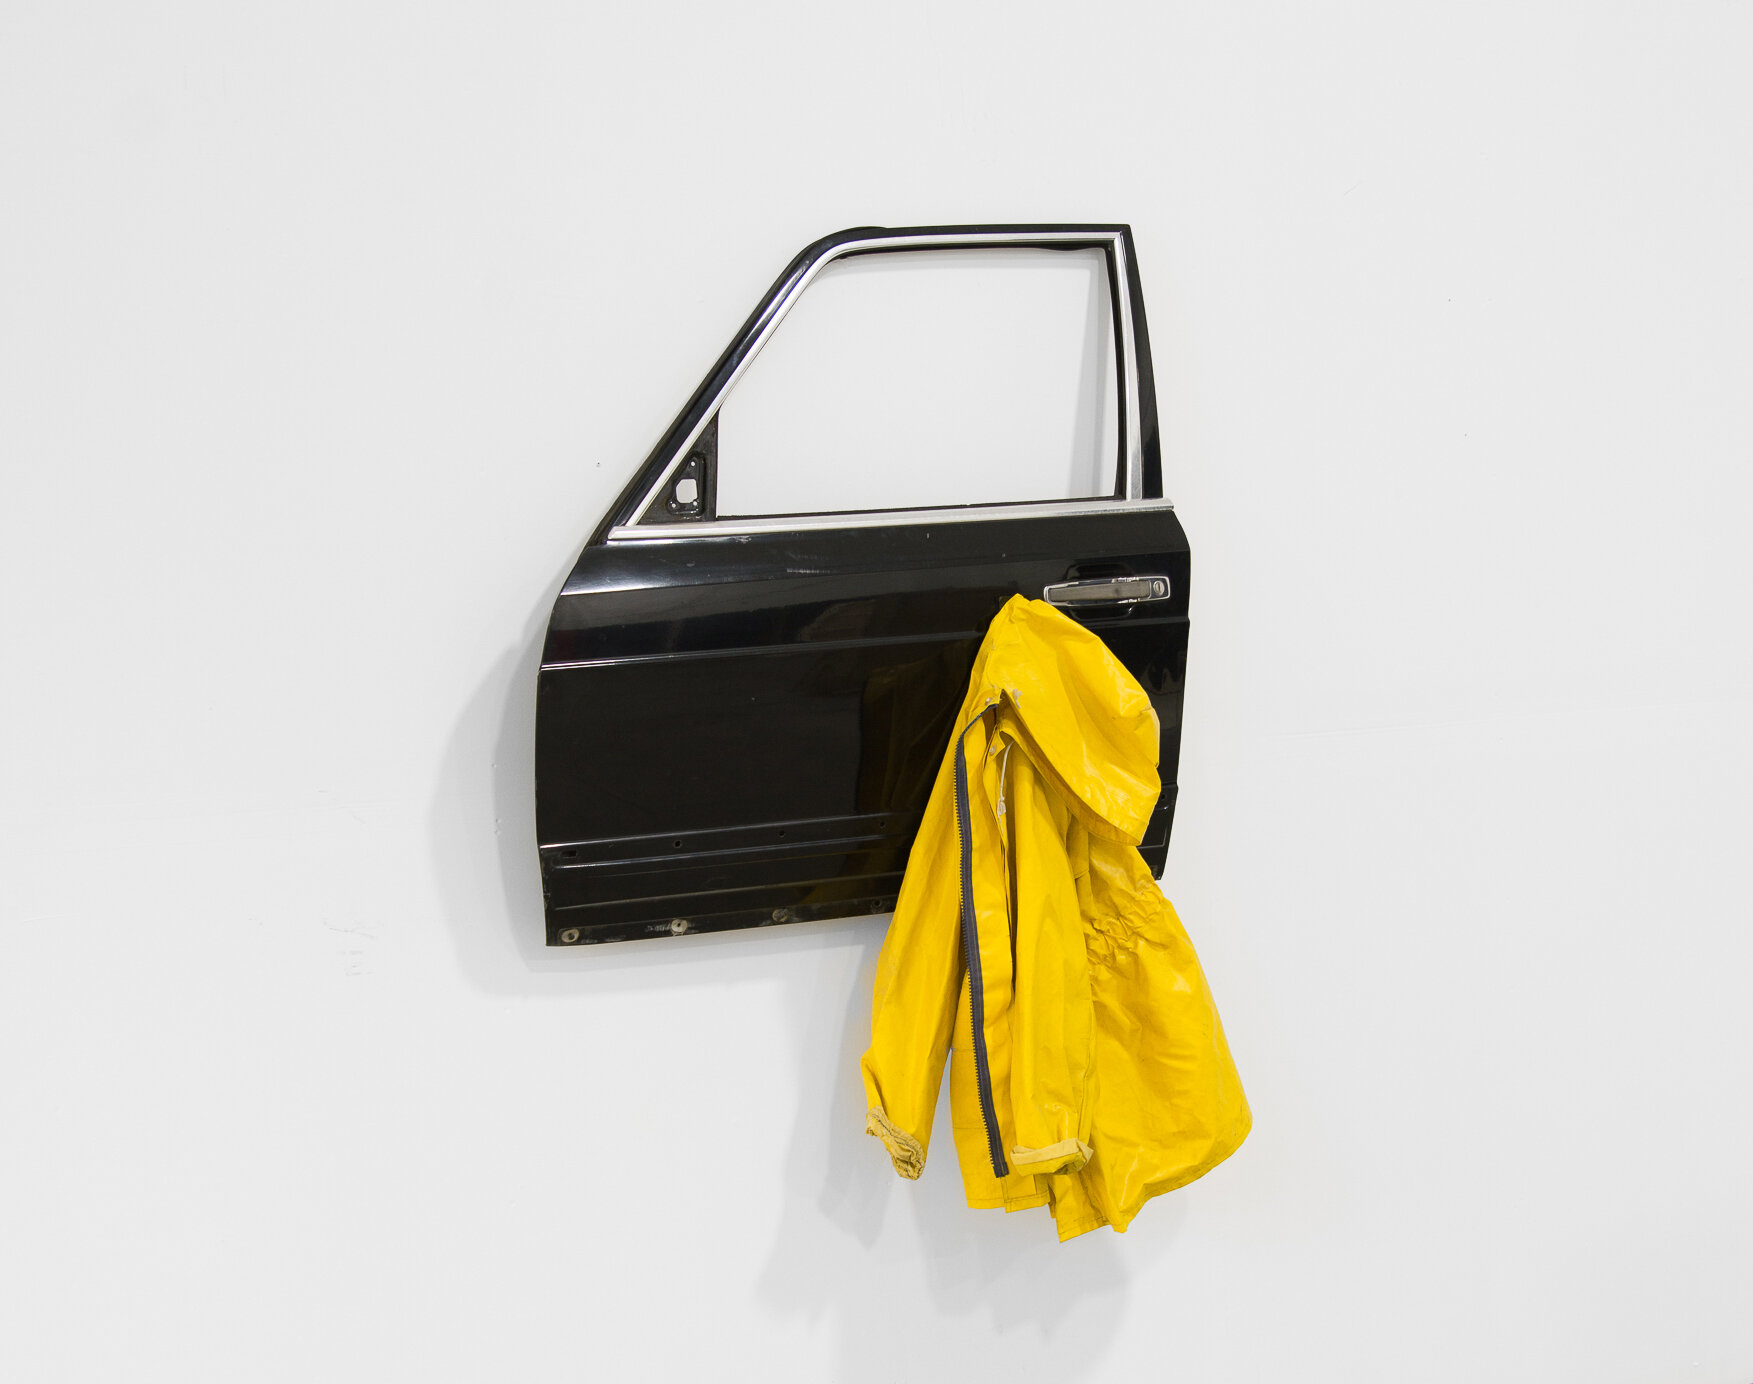  JOHNNY ABRAHAMS   (sideview) Untitled, 2020 car door with rain coat 60" x 42" x 6" 